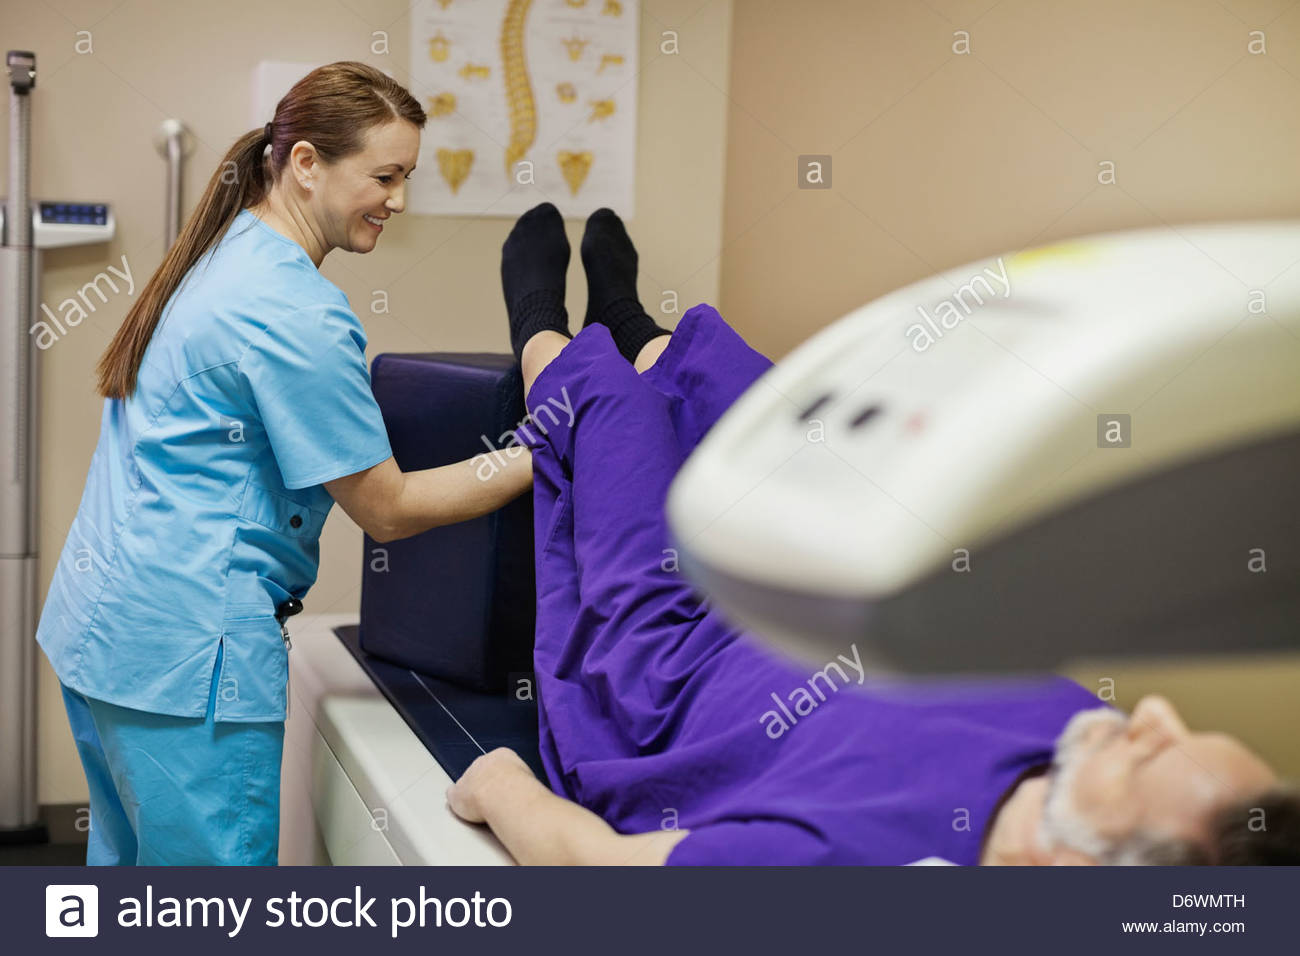 Technologist prepping patient for bone density scan in examination room Stock Photo